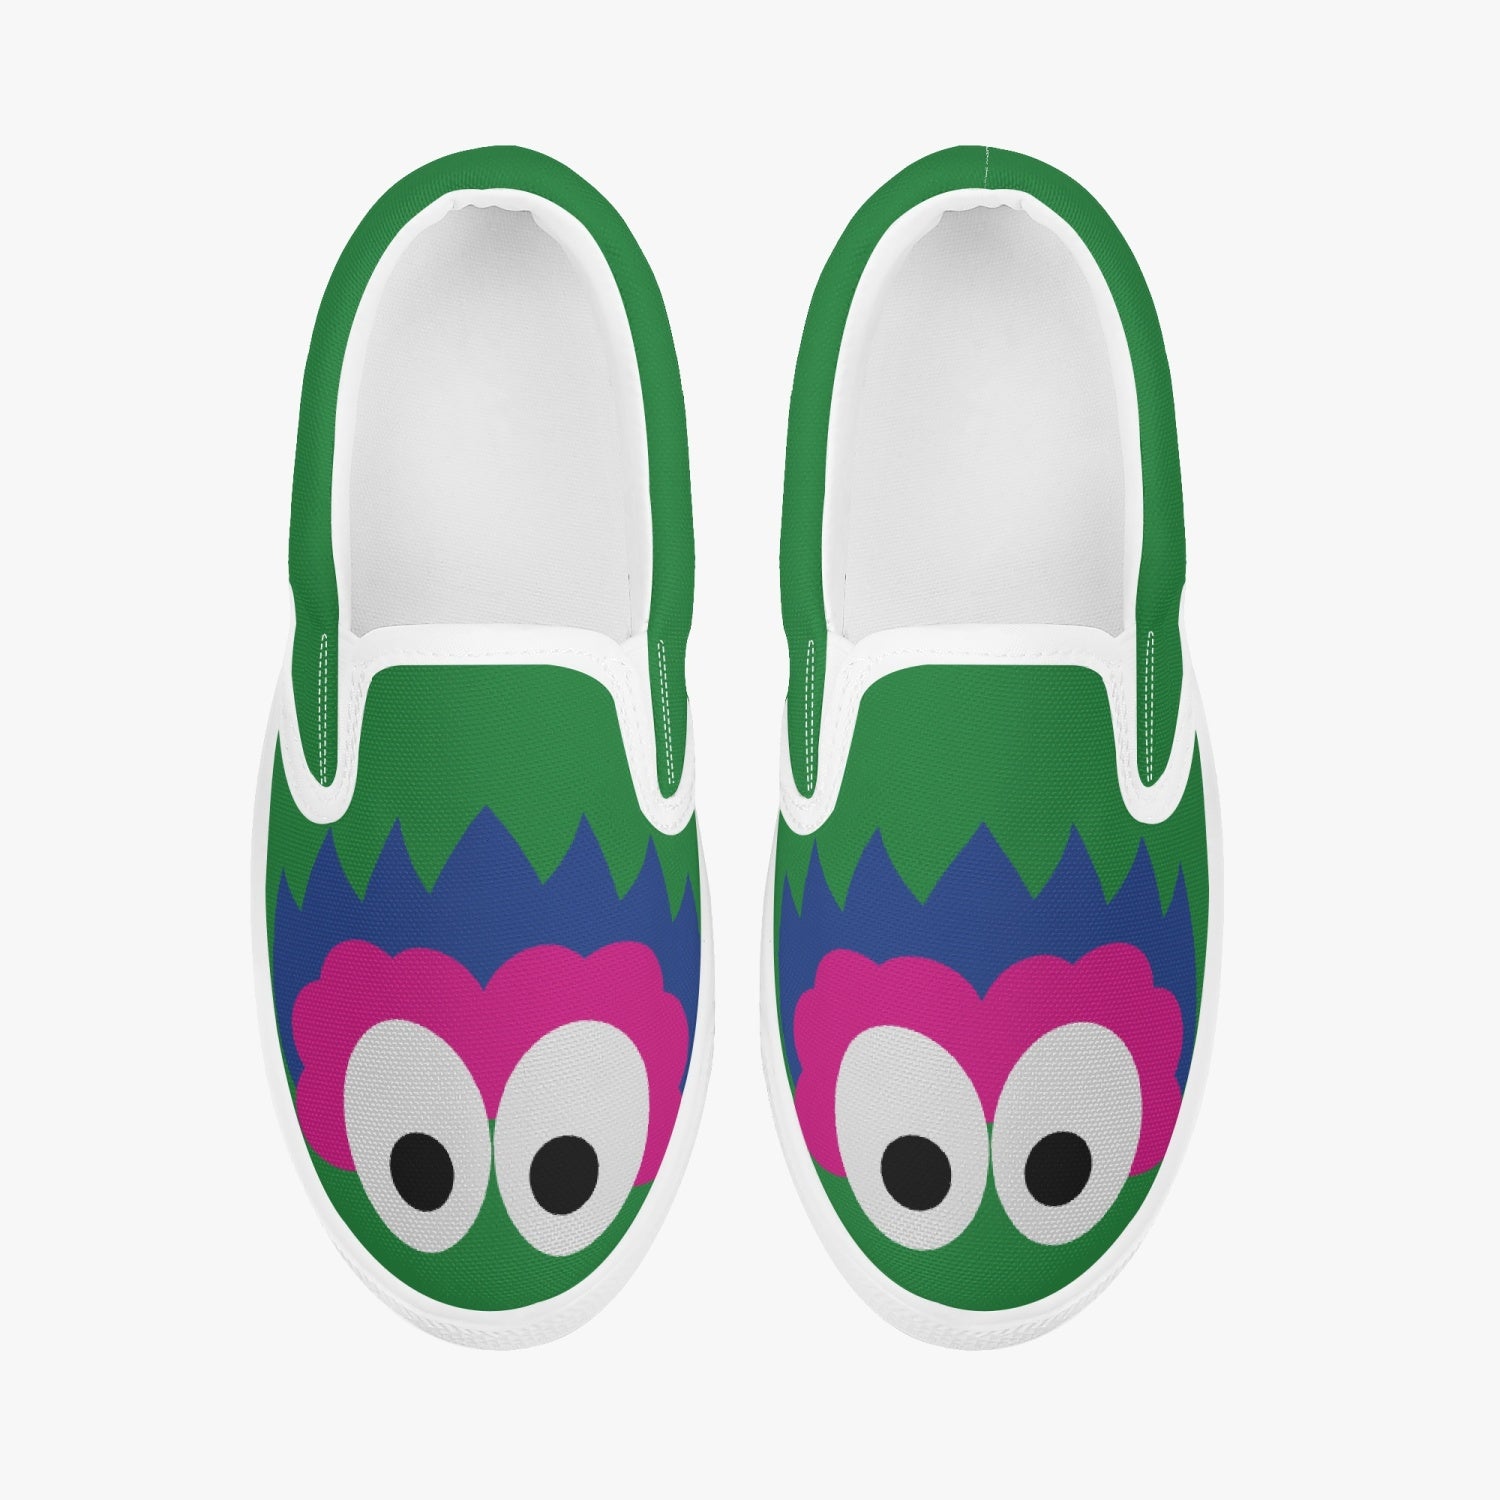 "The PHANS" Kids Slip-on Canvas Shoes